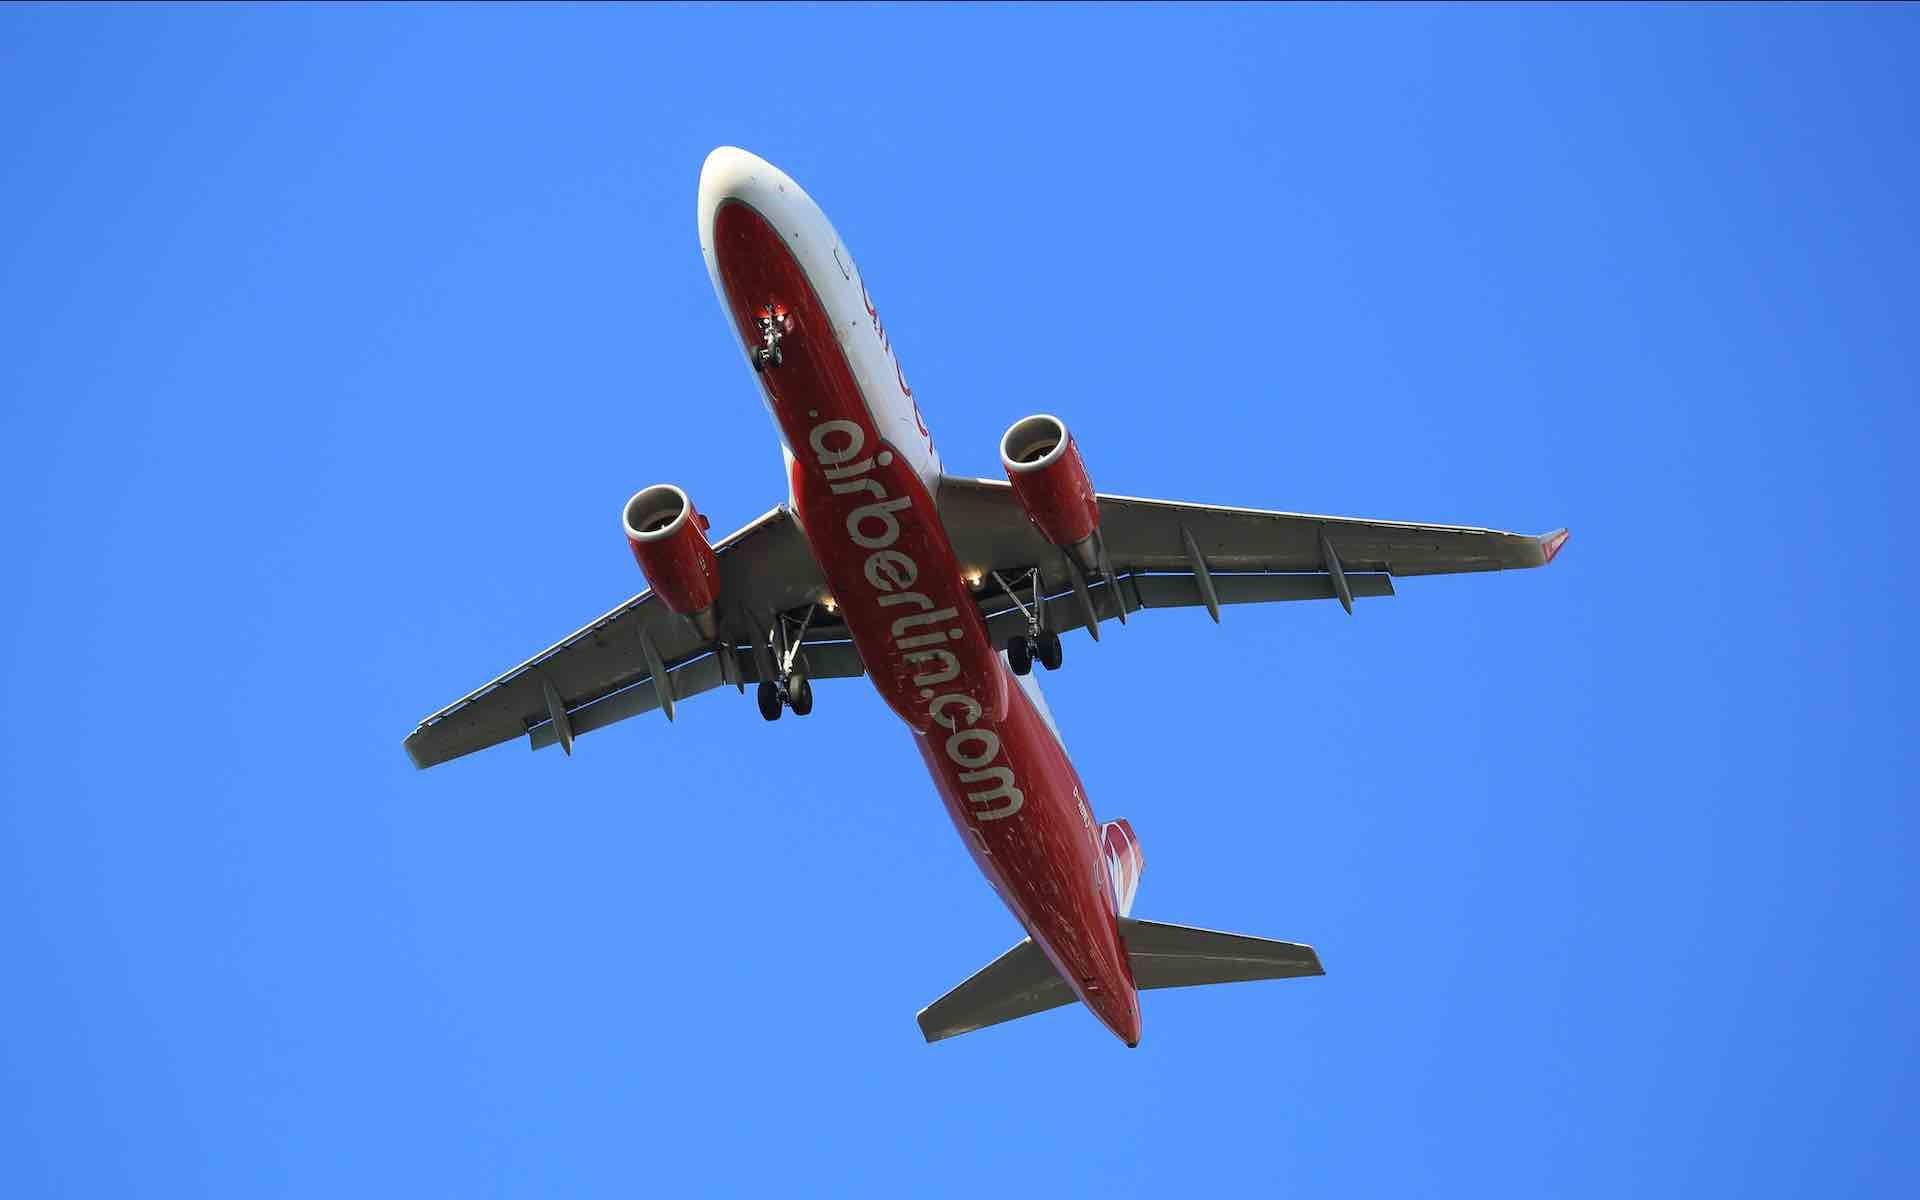 Air Berlin Insolvency: What Does This Mean for Your Claim?